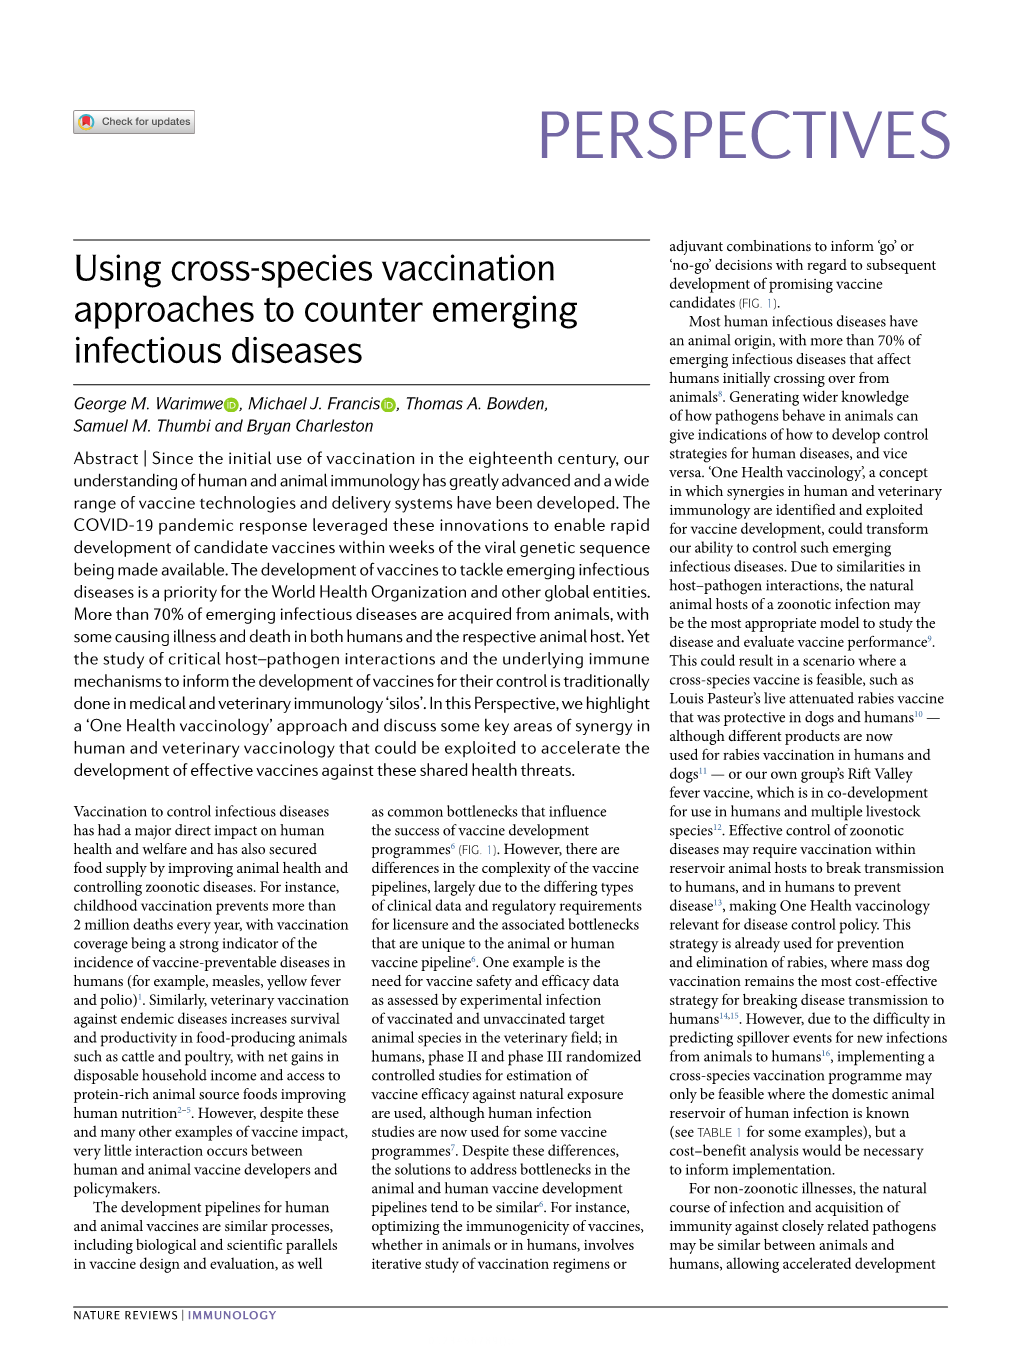 Using Cross-Species Vaccination Approaches to Counter Emerging